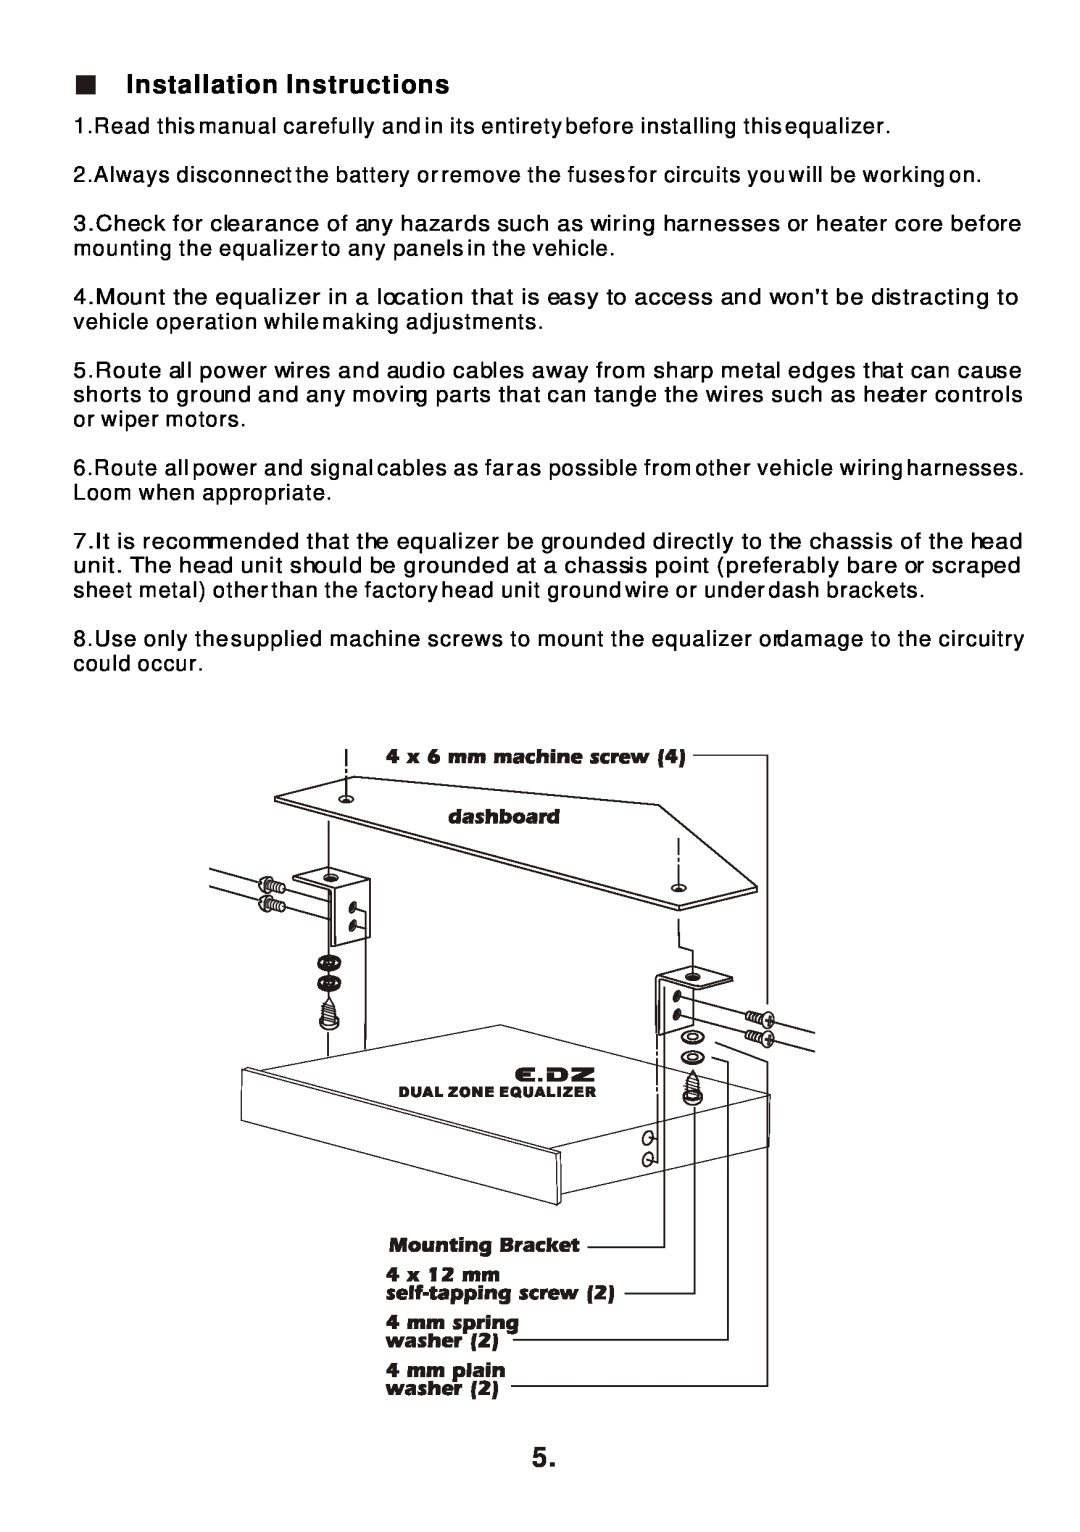 Precision Power E.DZ owner manual Installation Instructions 